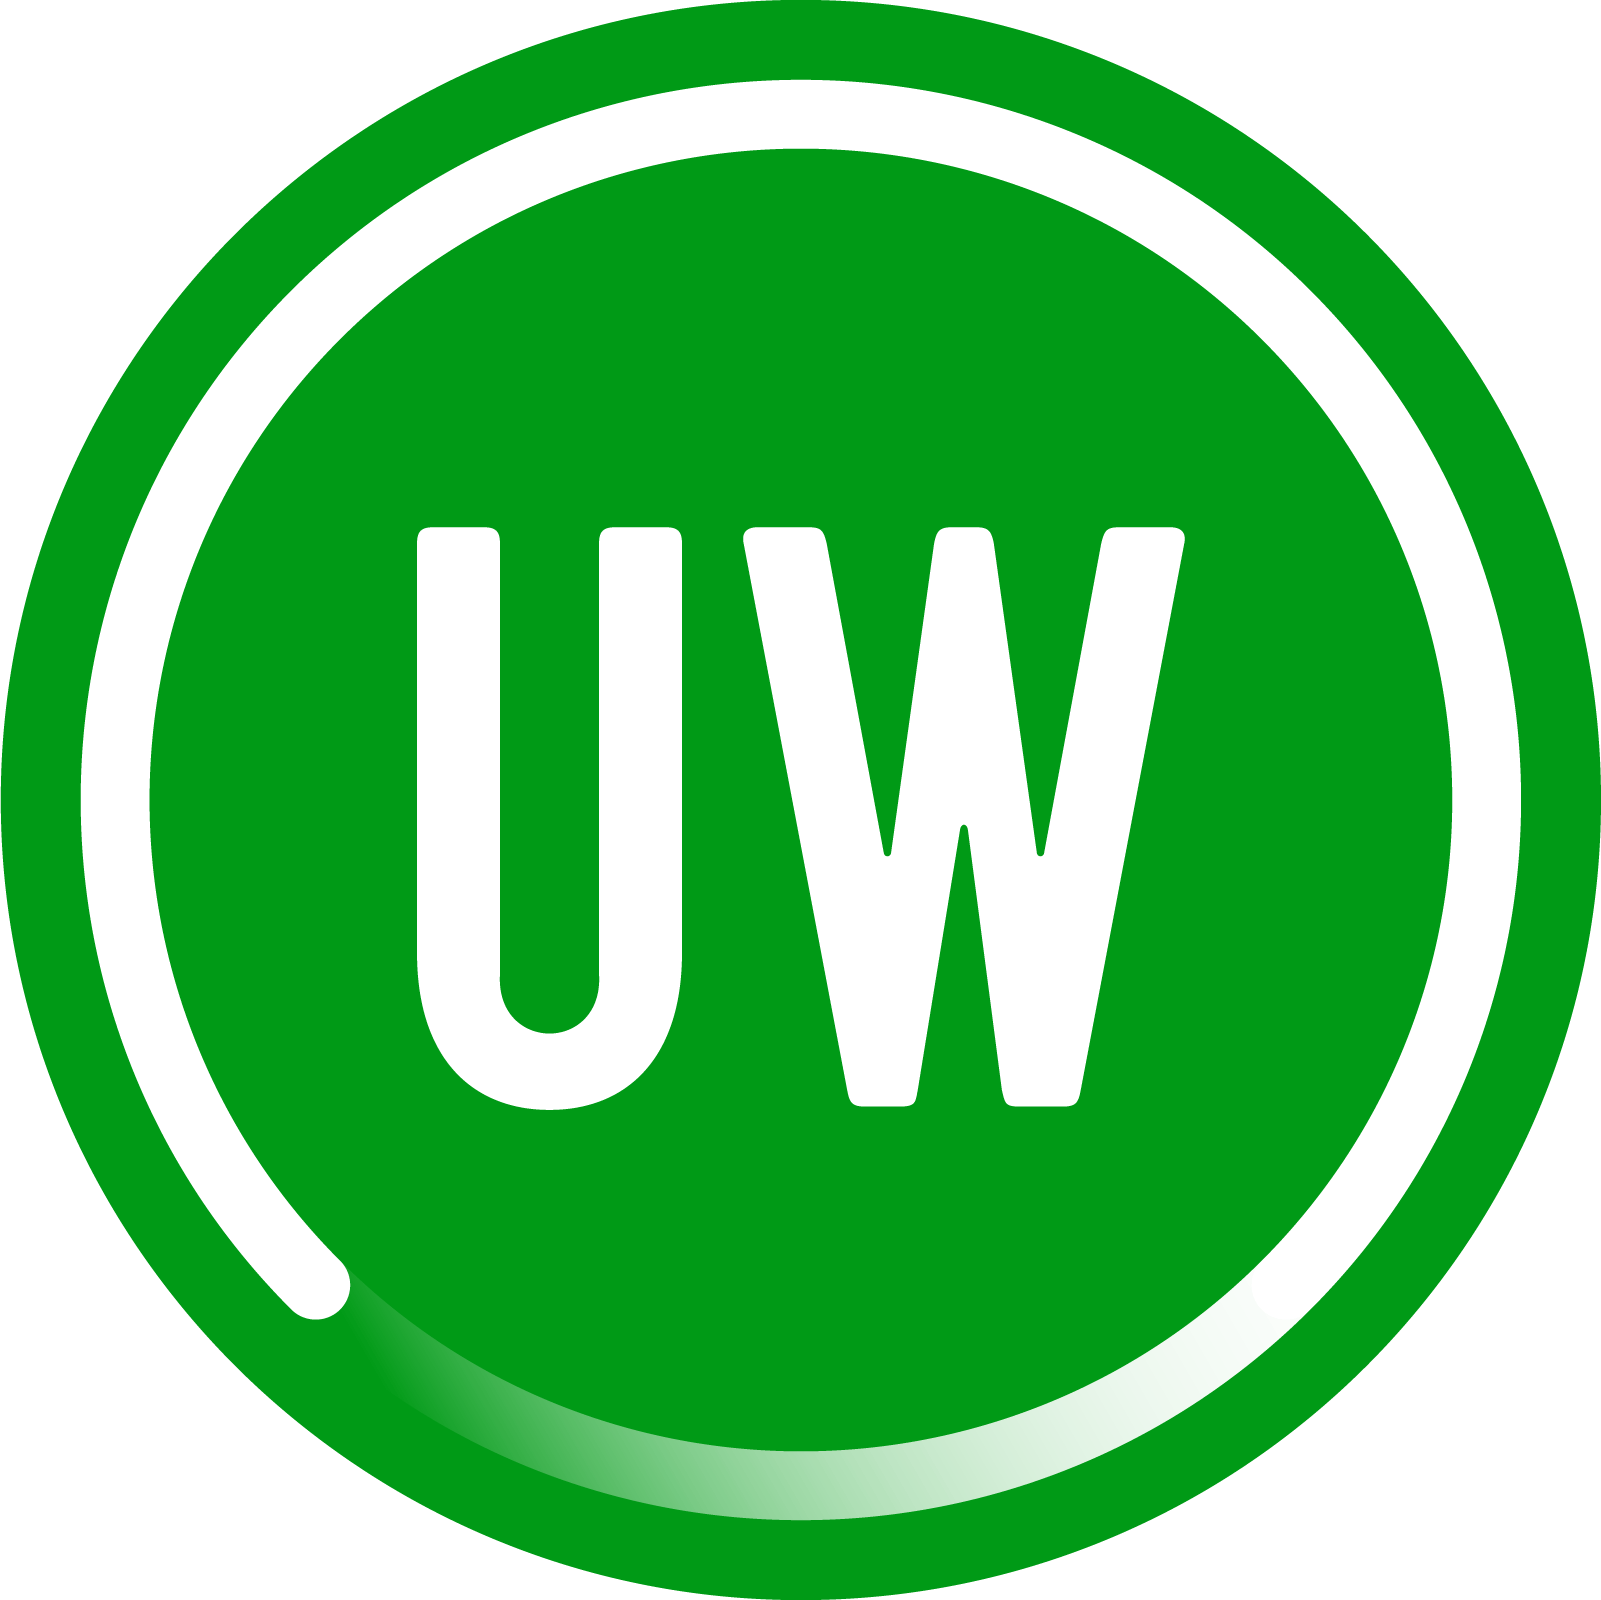 Unwrpd are supporting Status Row